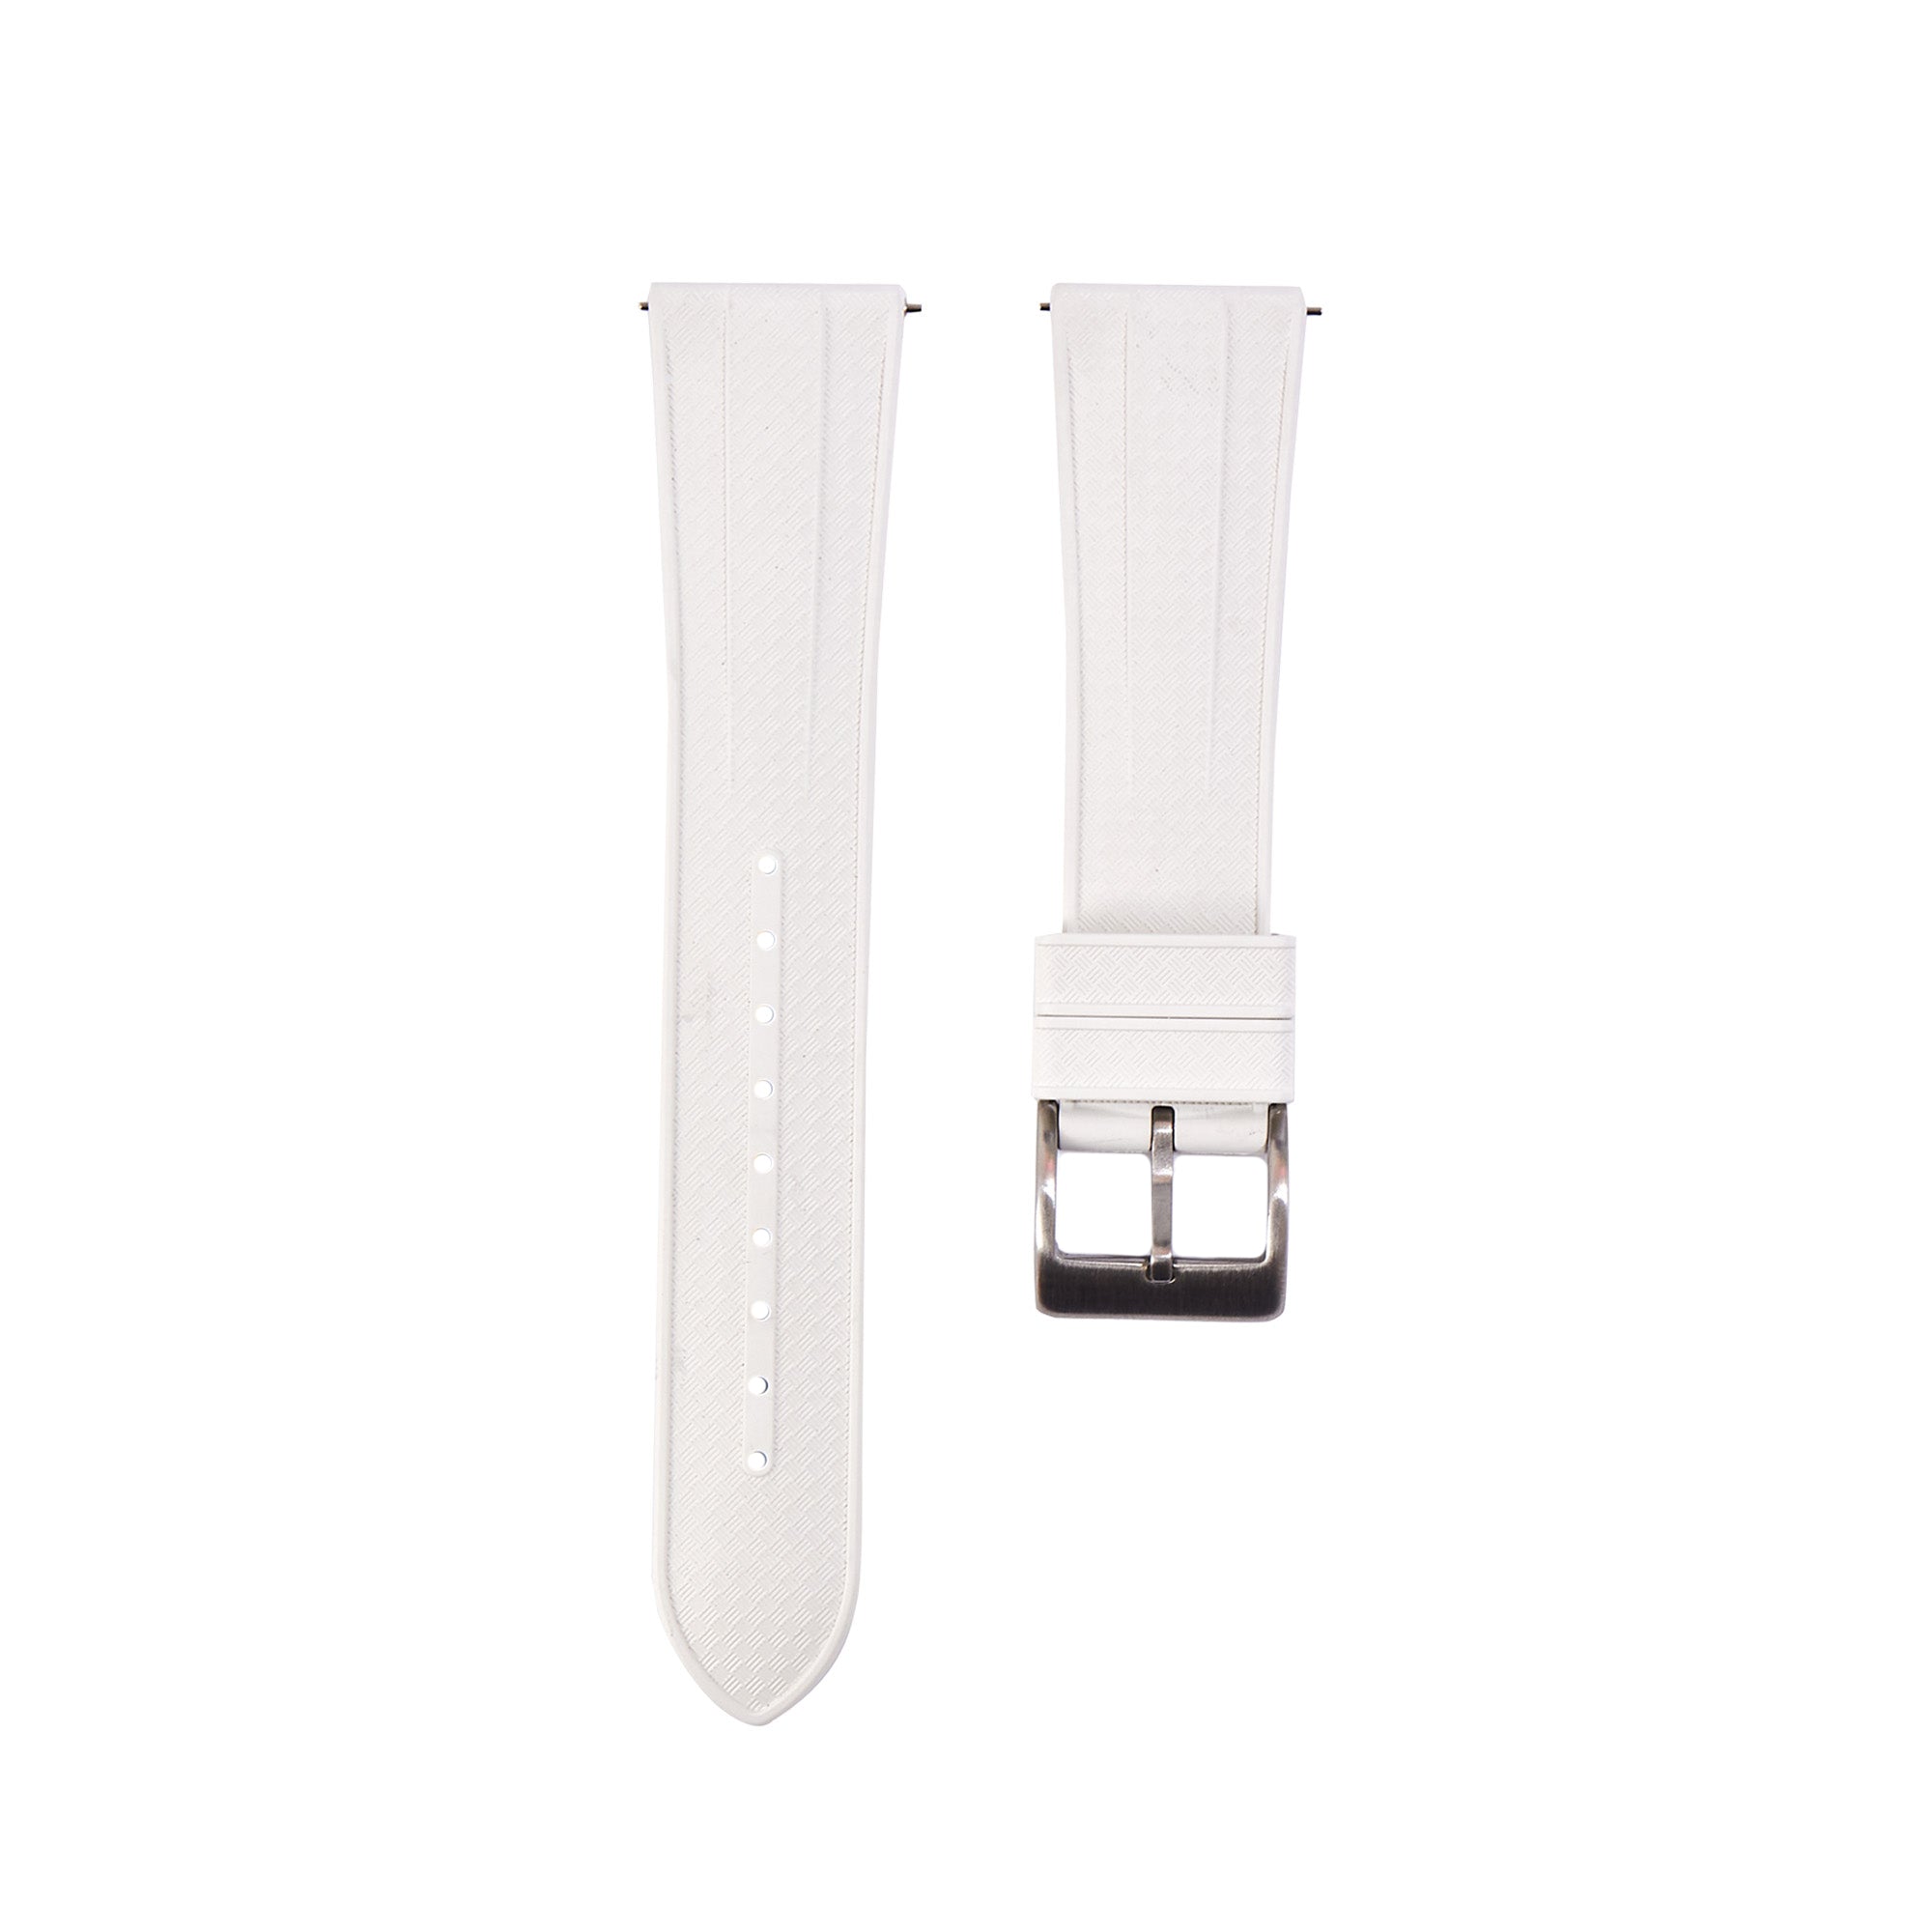 Grid FKM Rubber Strap - Quick-Release – Compatible with Blancpain x Swatch - White (2412) -StrapSeeker